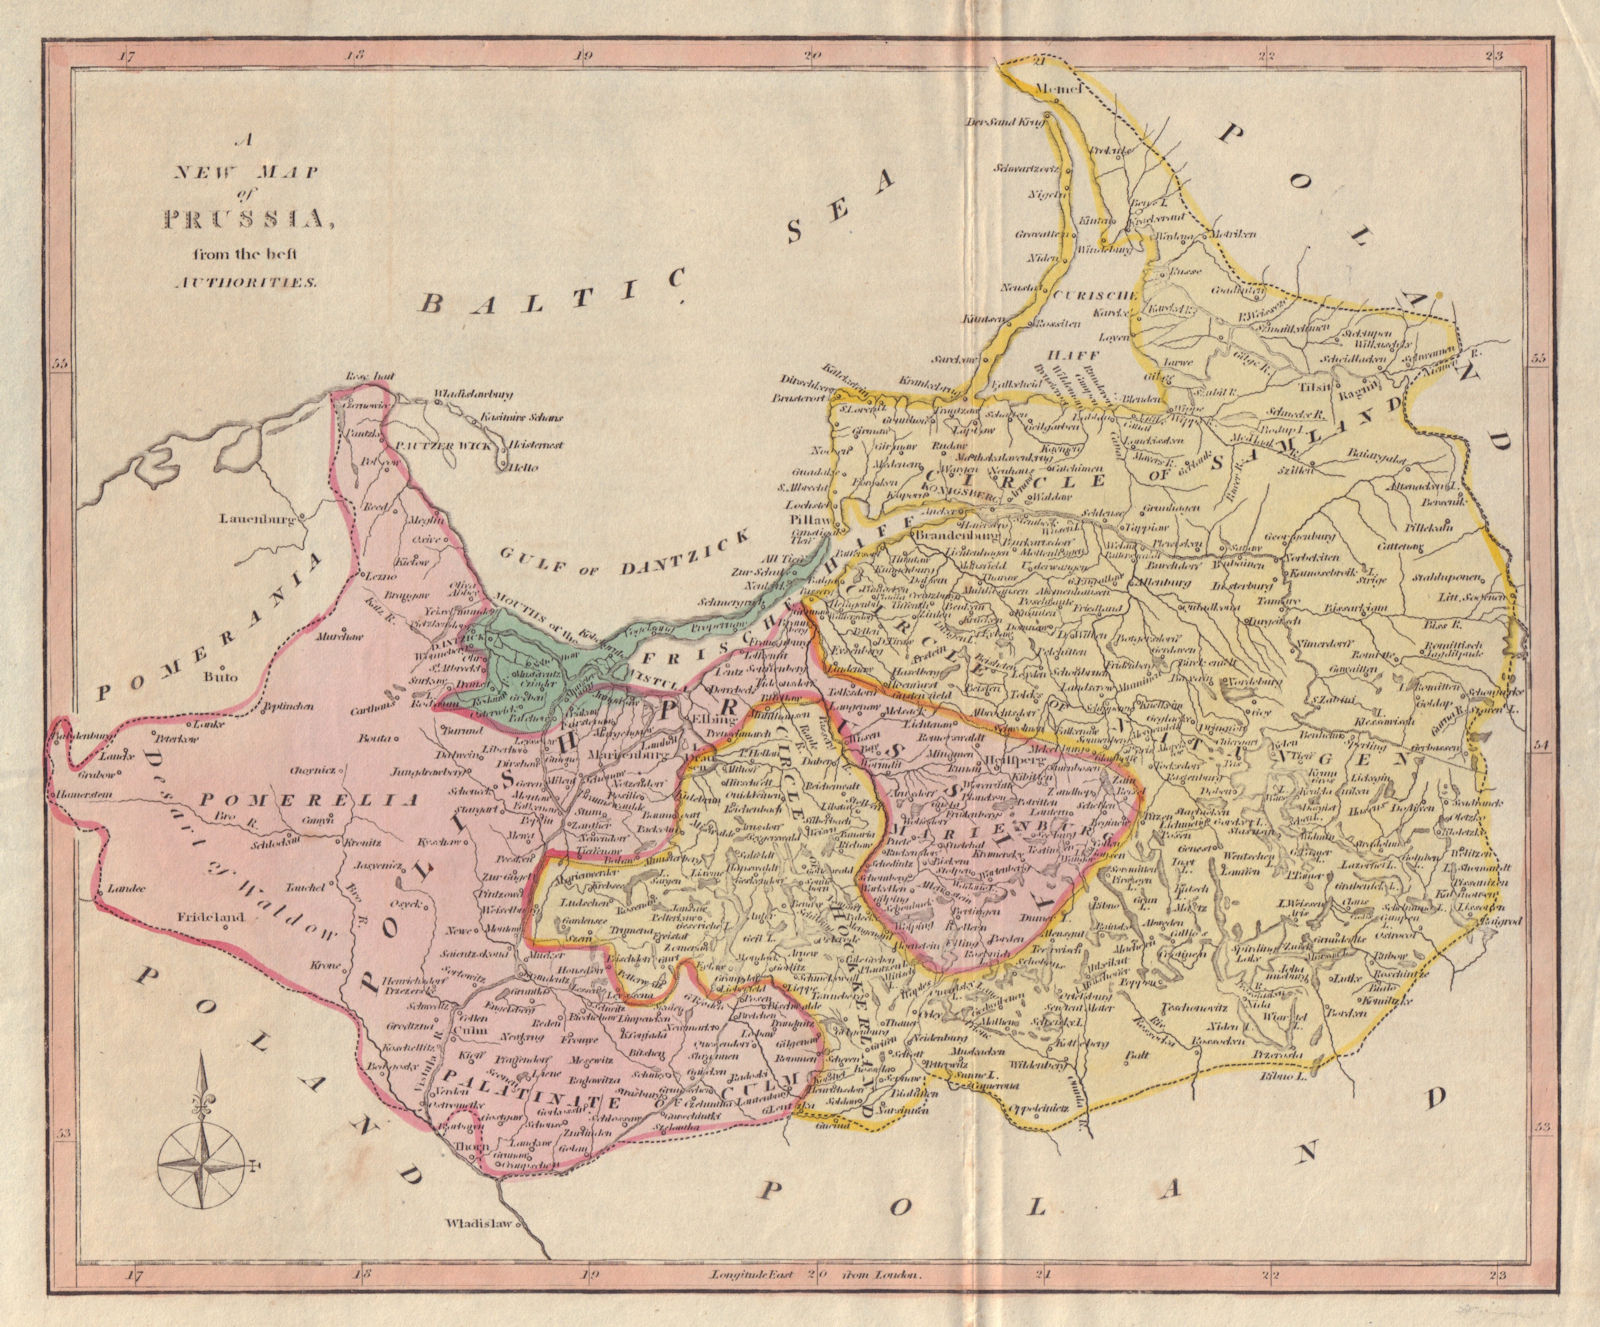 Associate Product A new map of Prussia from the best authorities. Northern Poland. COOKE 1817